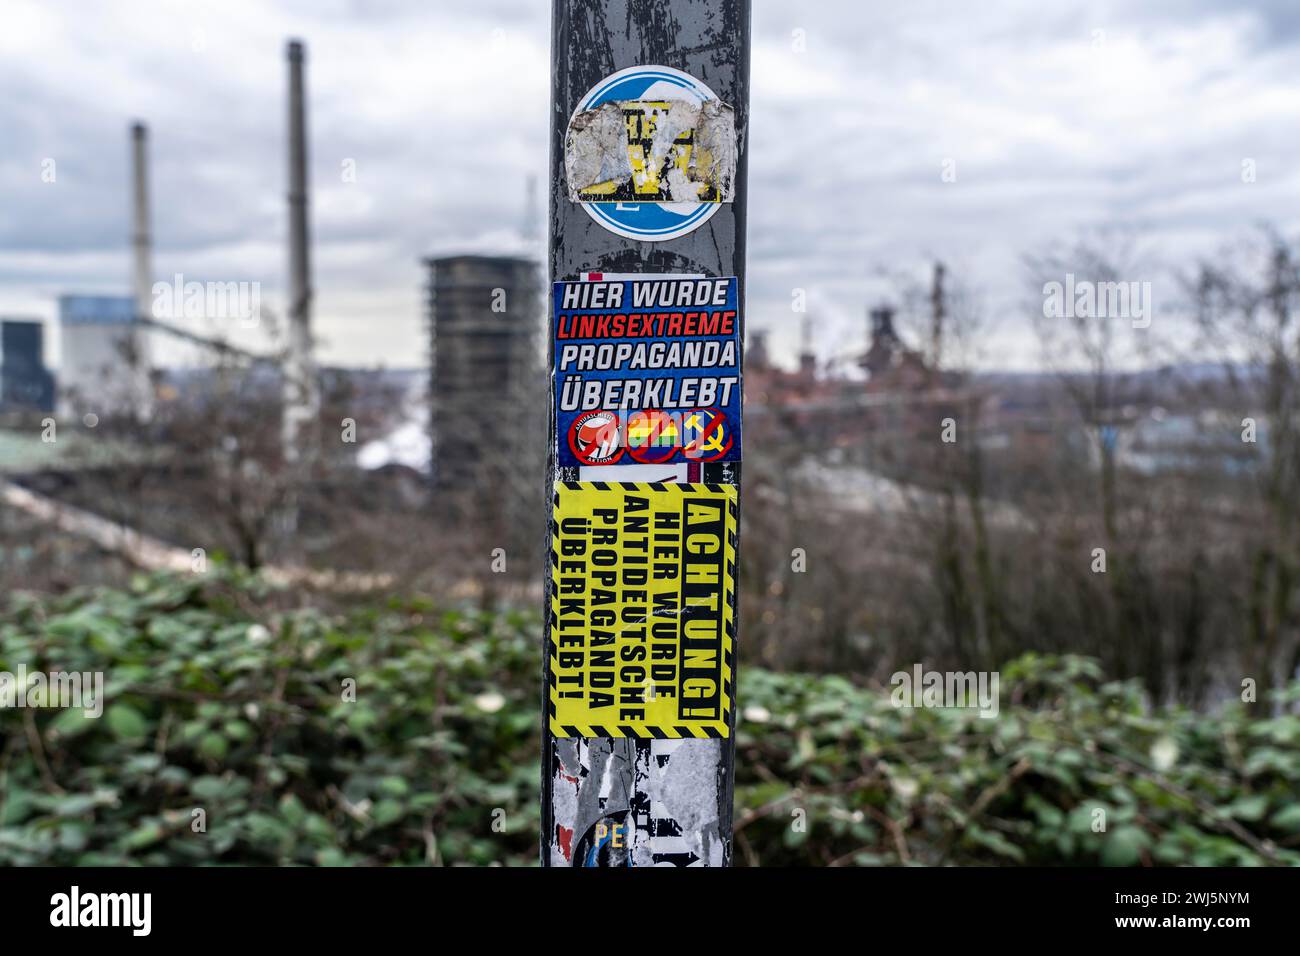 Stickers of right-wing extremist groups pasted over stickers of apparently left-wing groups, Duisburg, NRW, Germany, Stock Photo